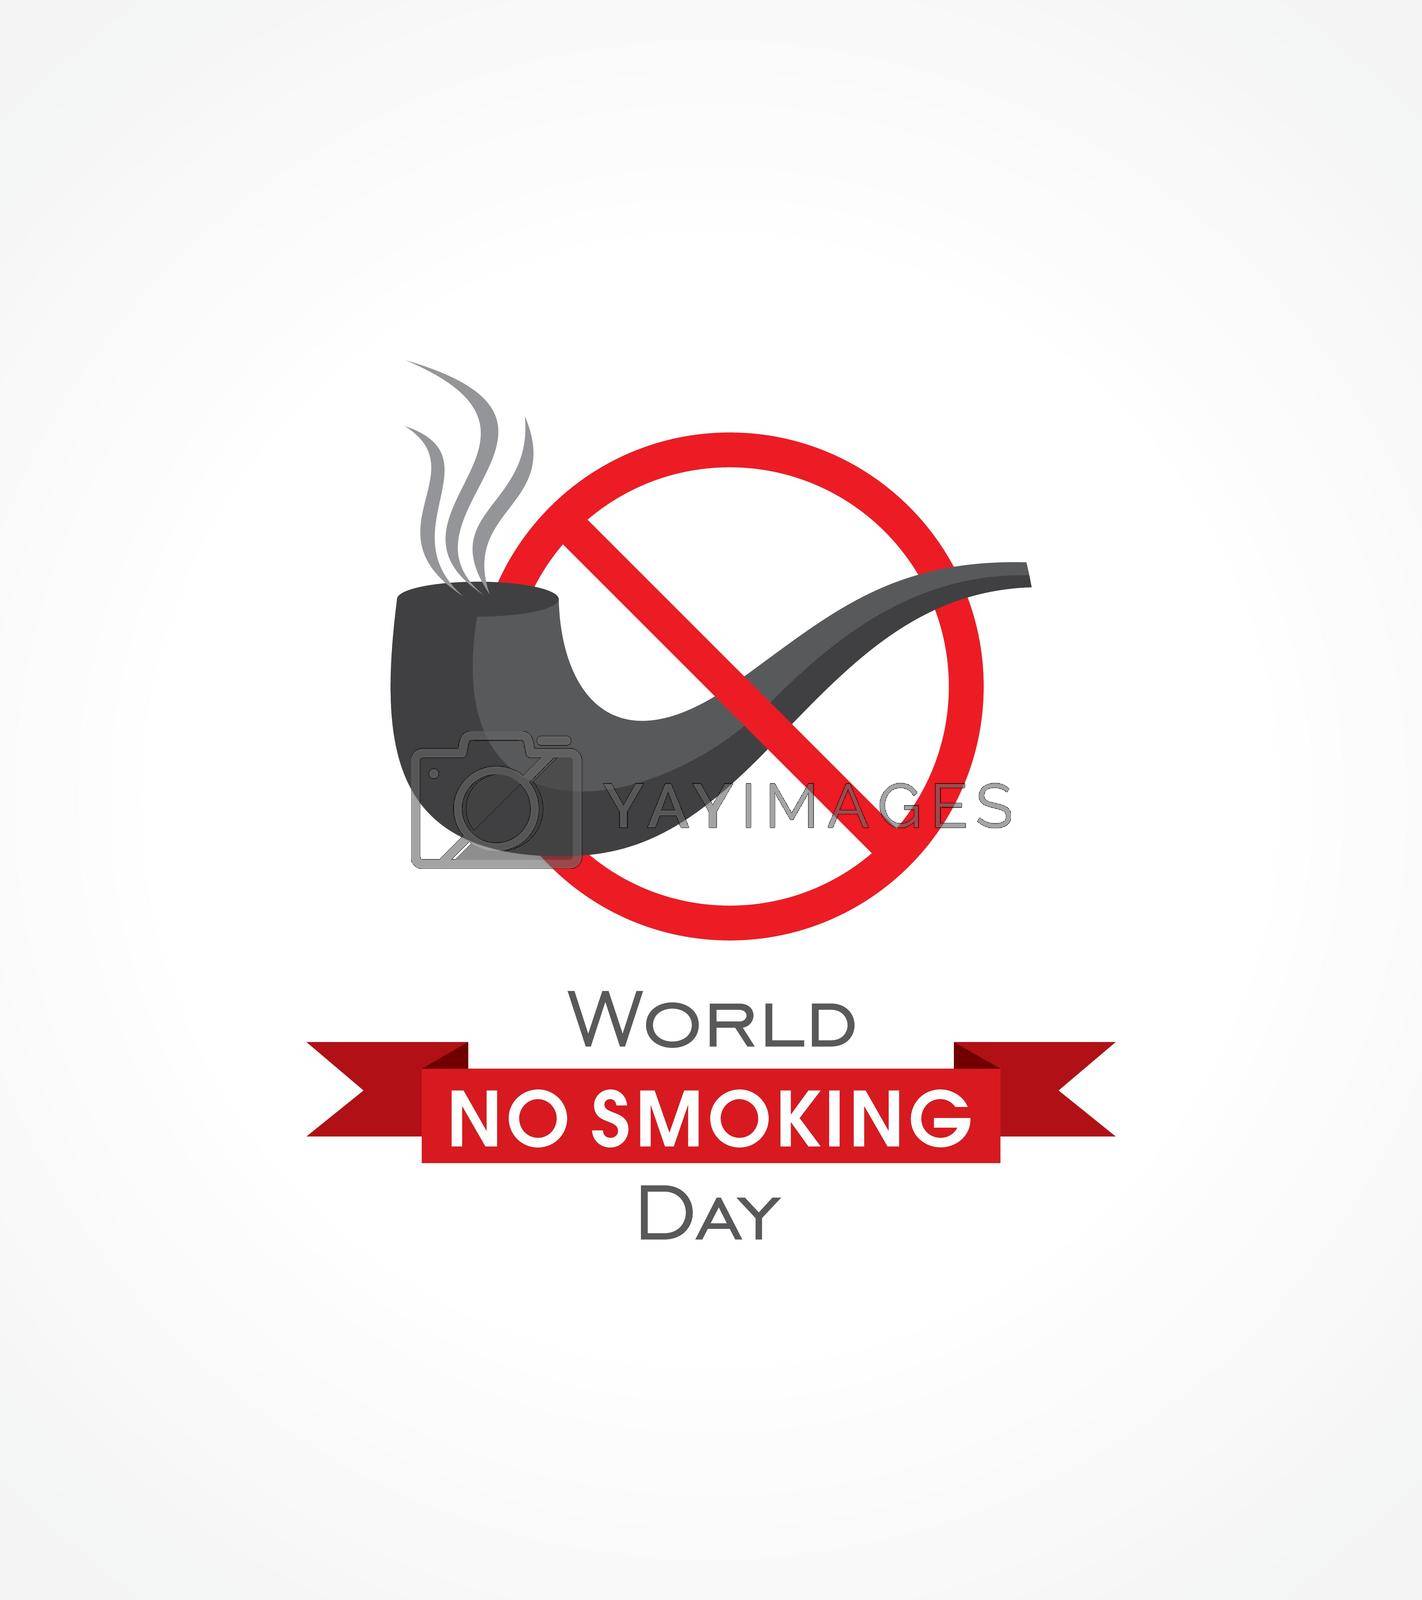 Royalty free image of World No Smoking day observed on second Wednesday of march by graphicsdunia4you